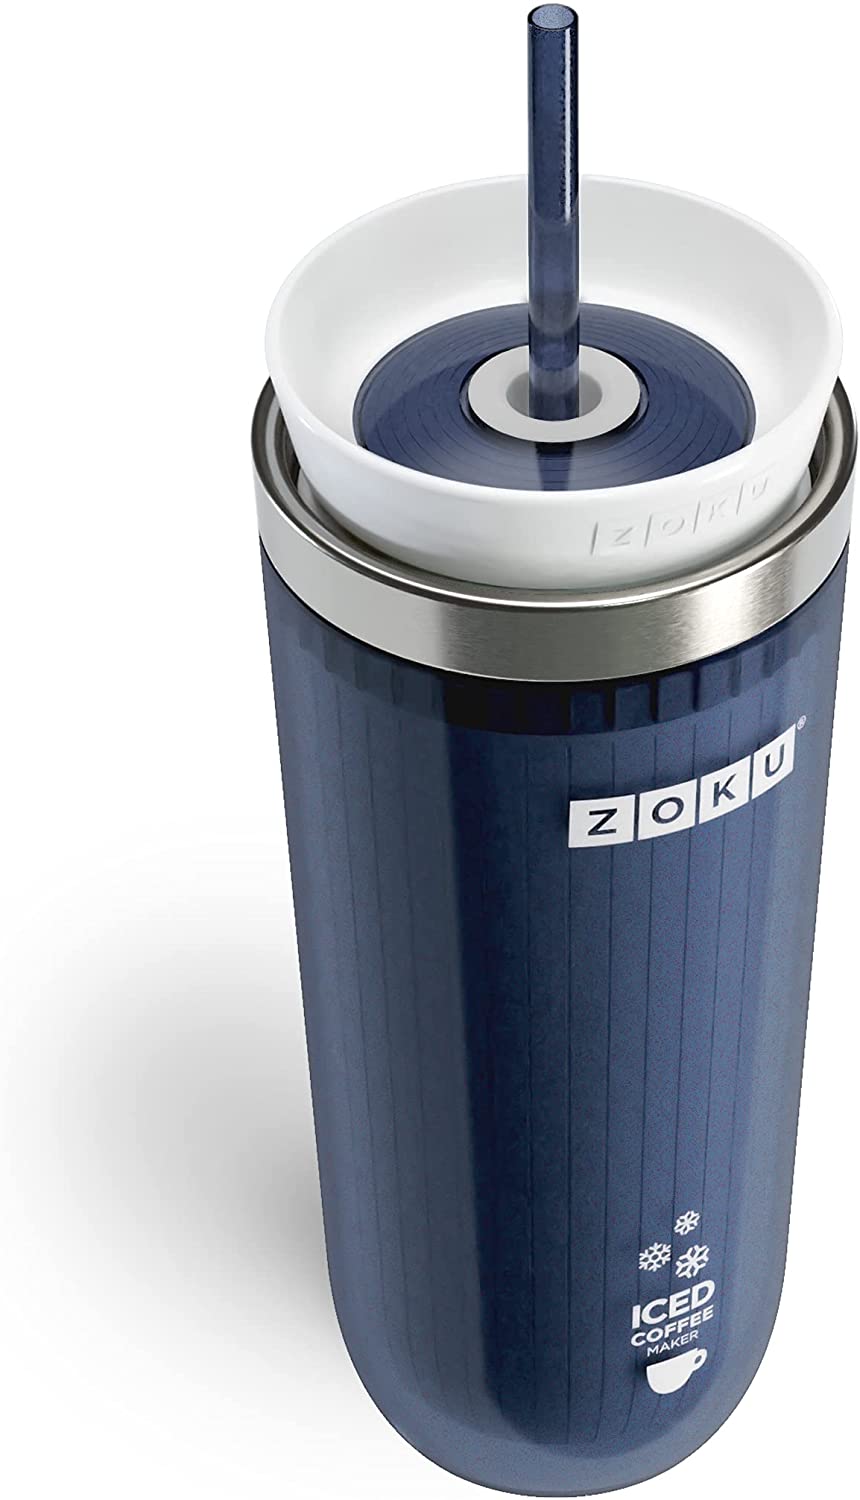 Zoku Instant Iced Coffee Maker Review